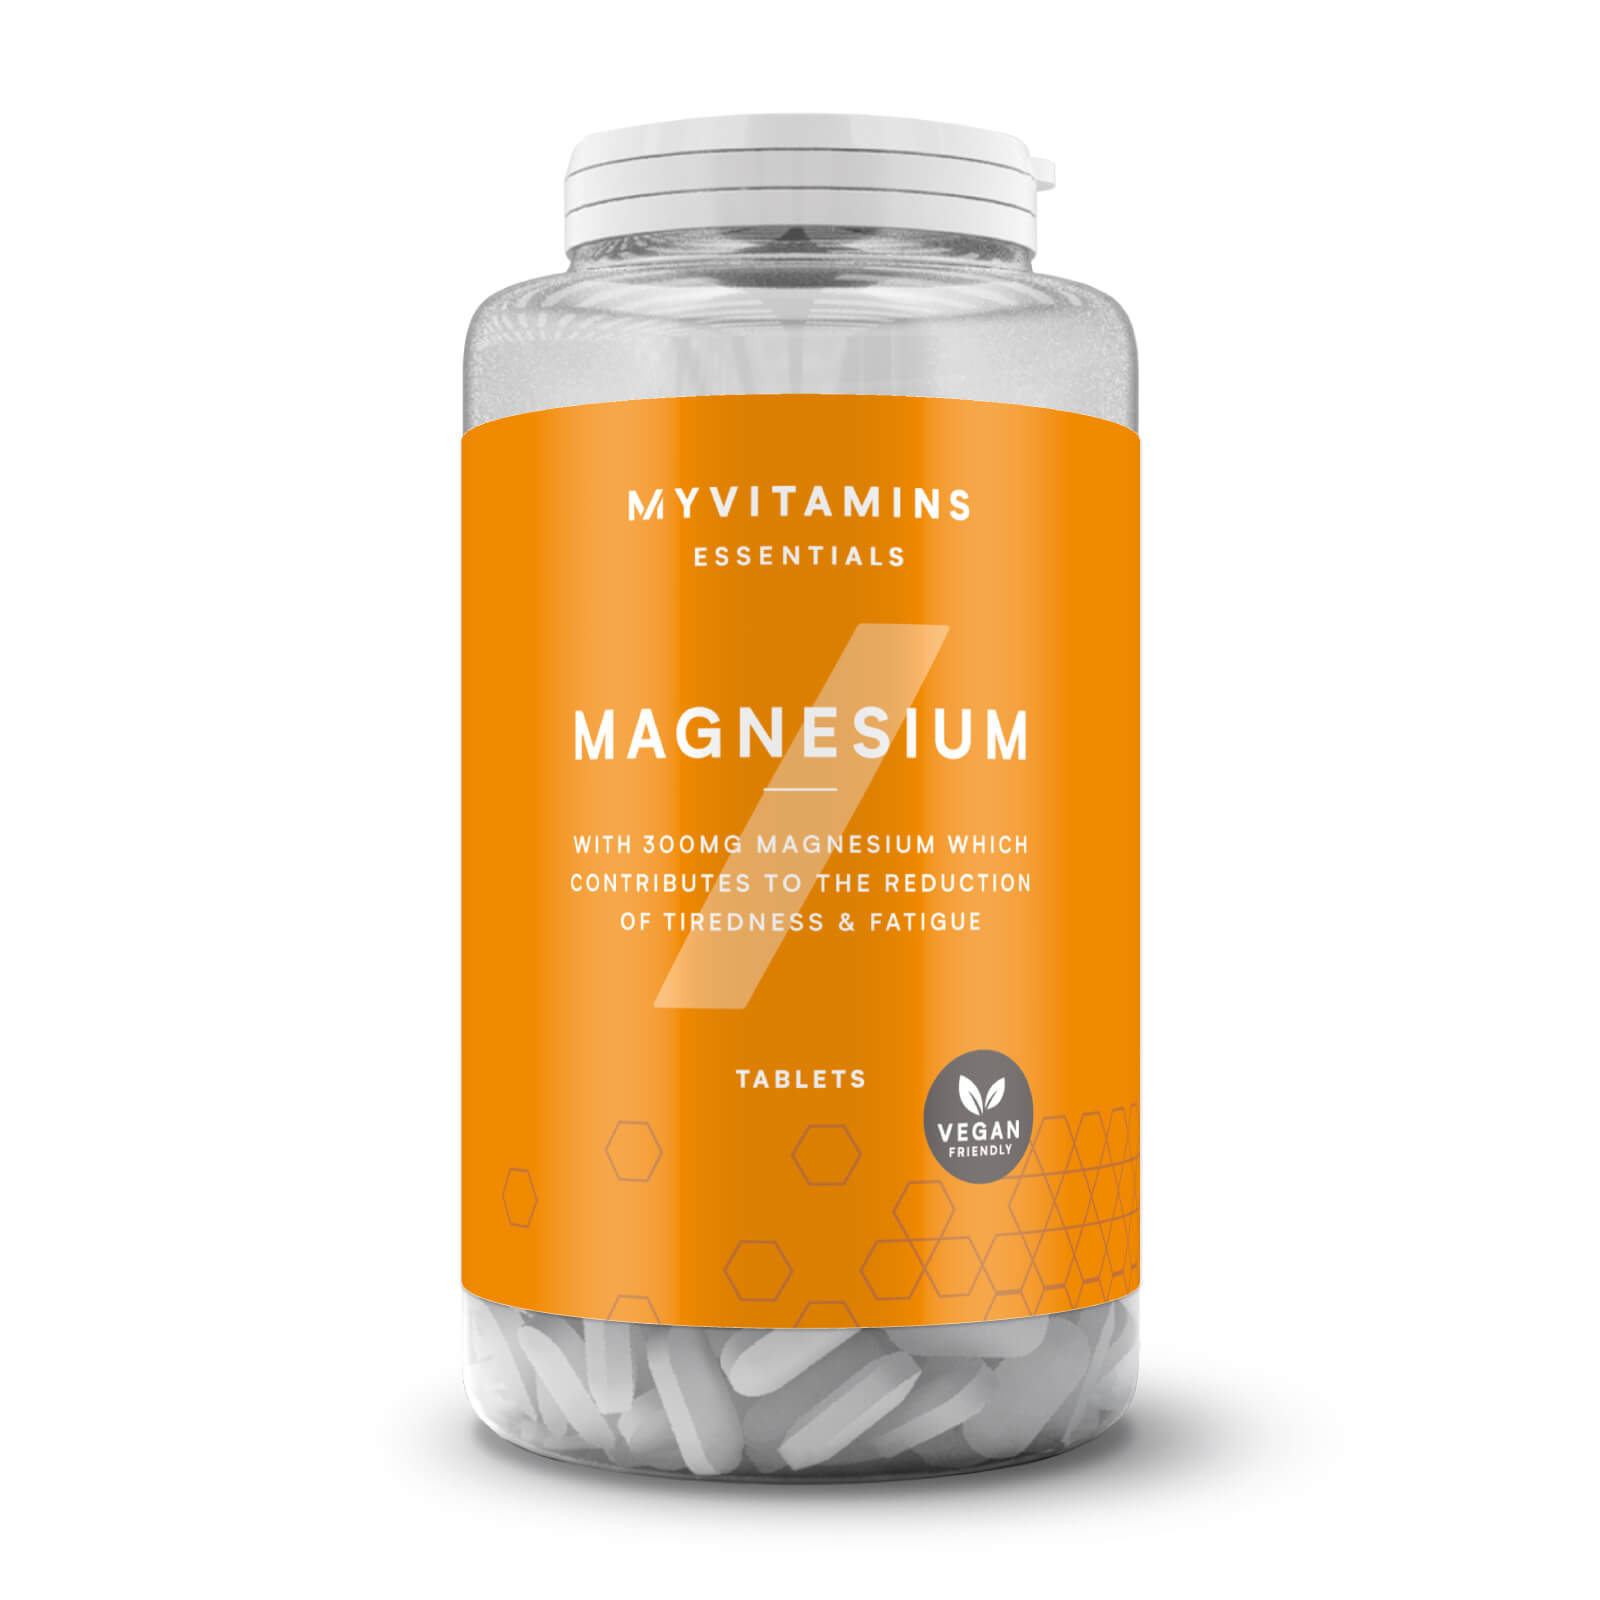 Magnesium Tablets - 3 Months (270 Tablets)